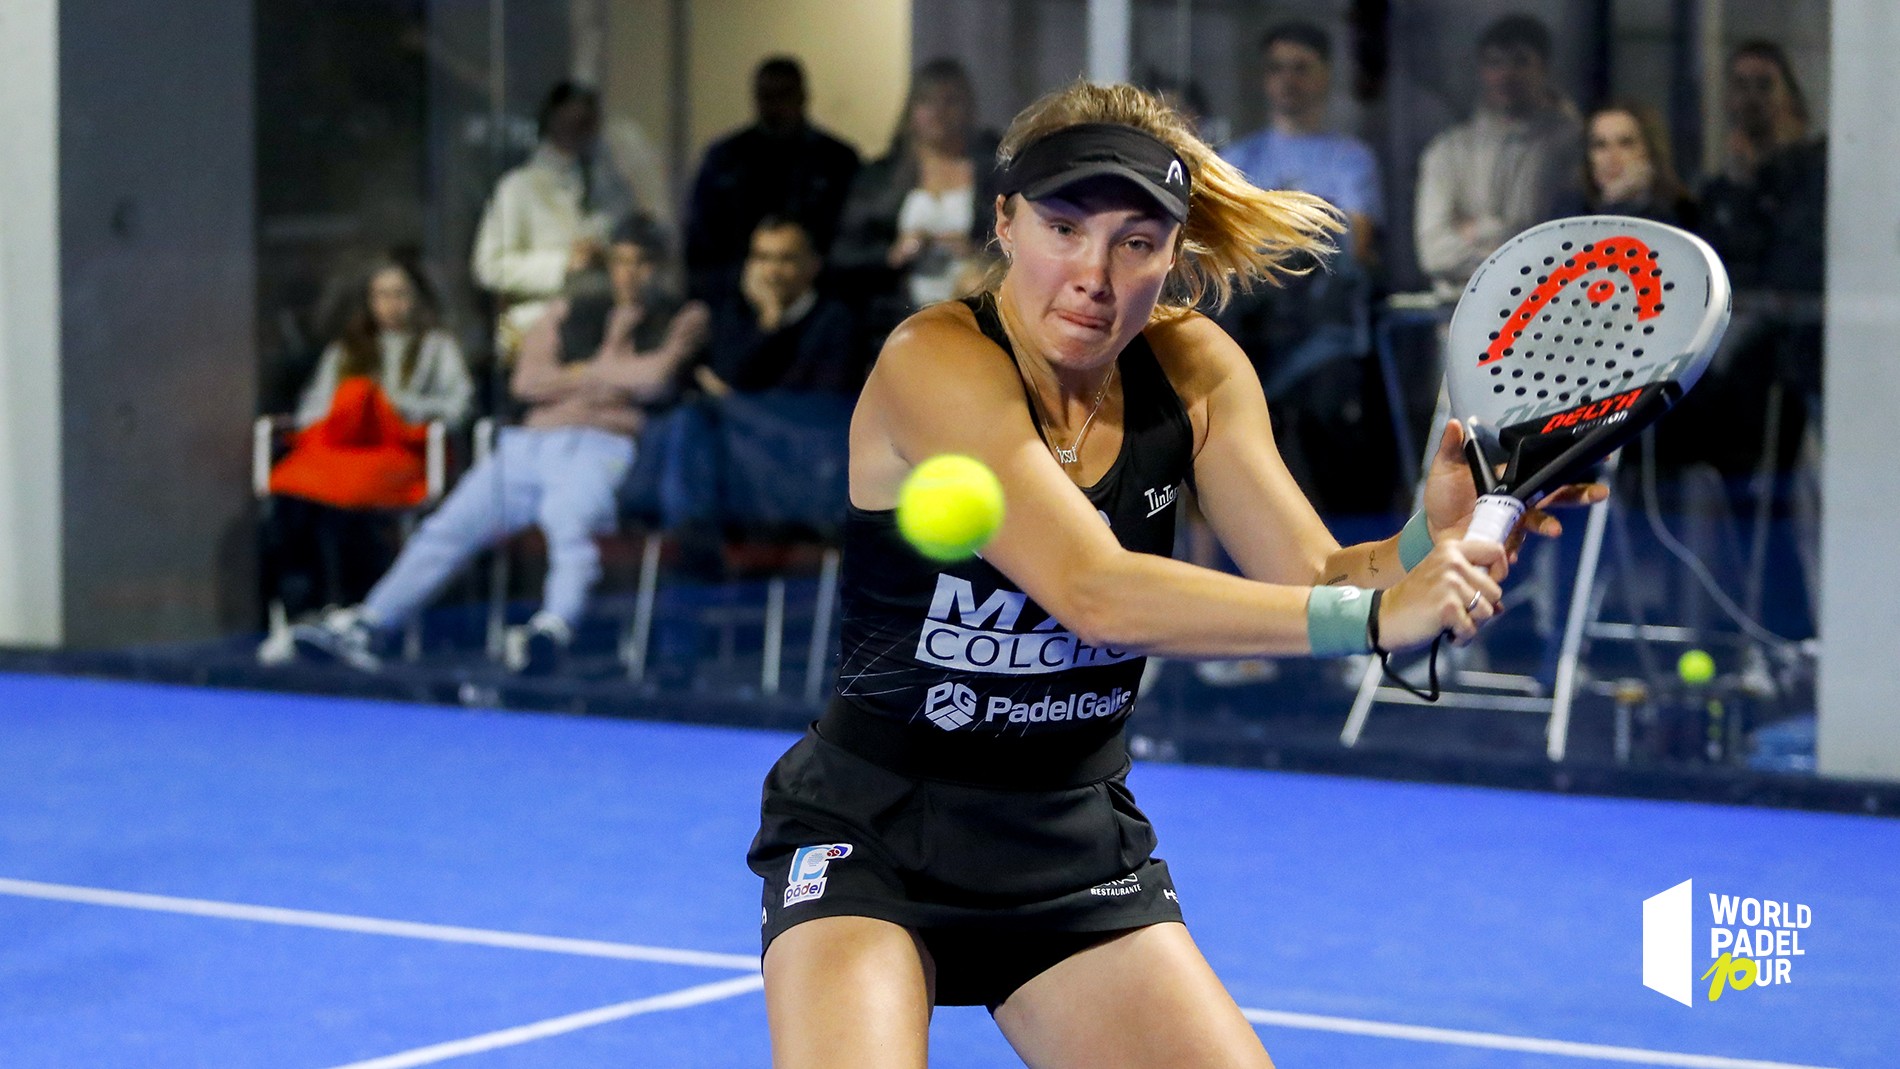 International affair in Paraguay Padel Open qualifying finals!